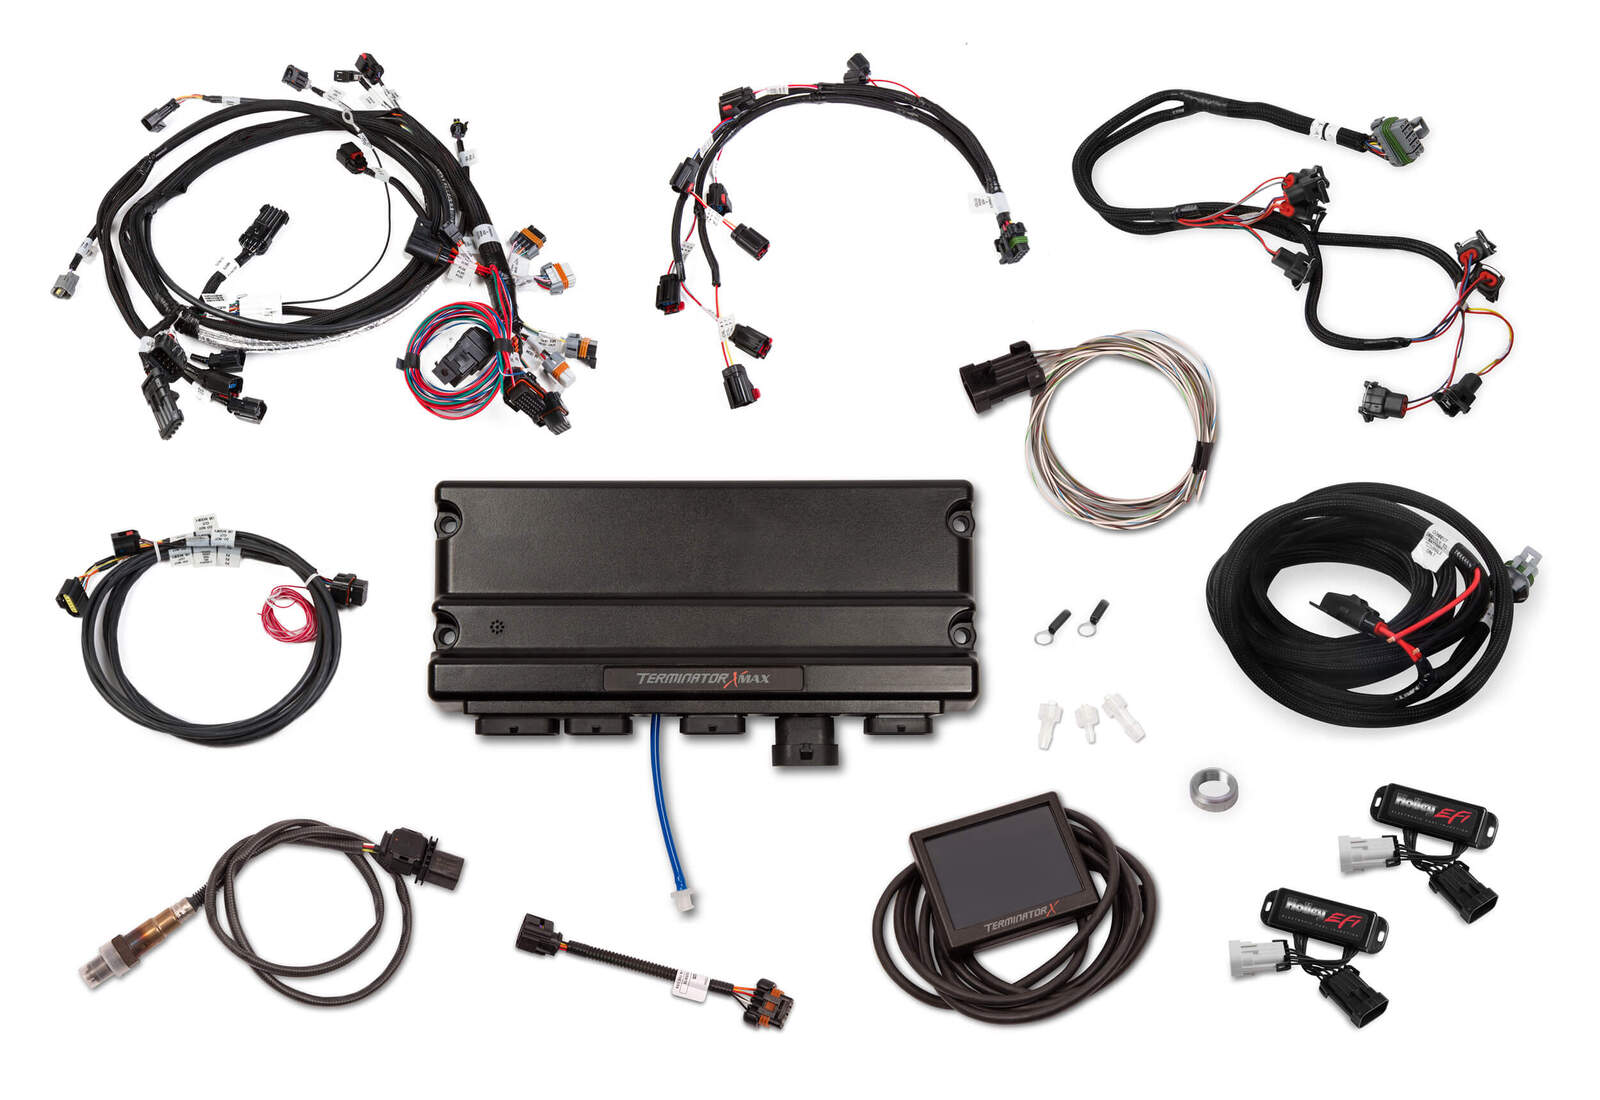 Holley EFI Engine Management System, 2003-06 Hemi Gen III, Drive by Wire, Non-VVT Transmission Controller, EV1 Injectors, Kits